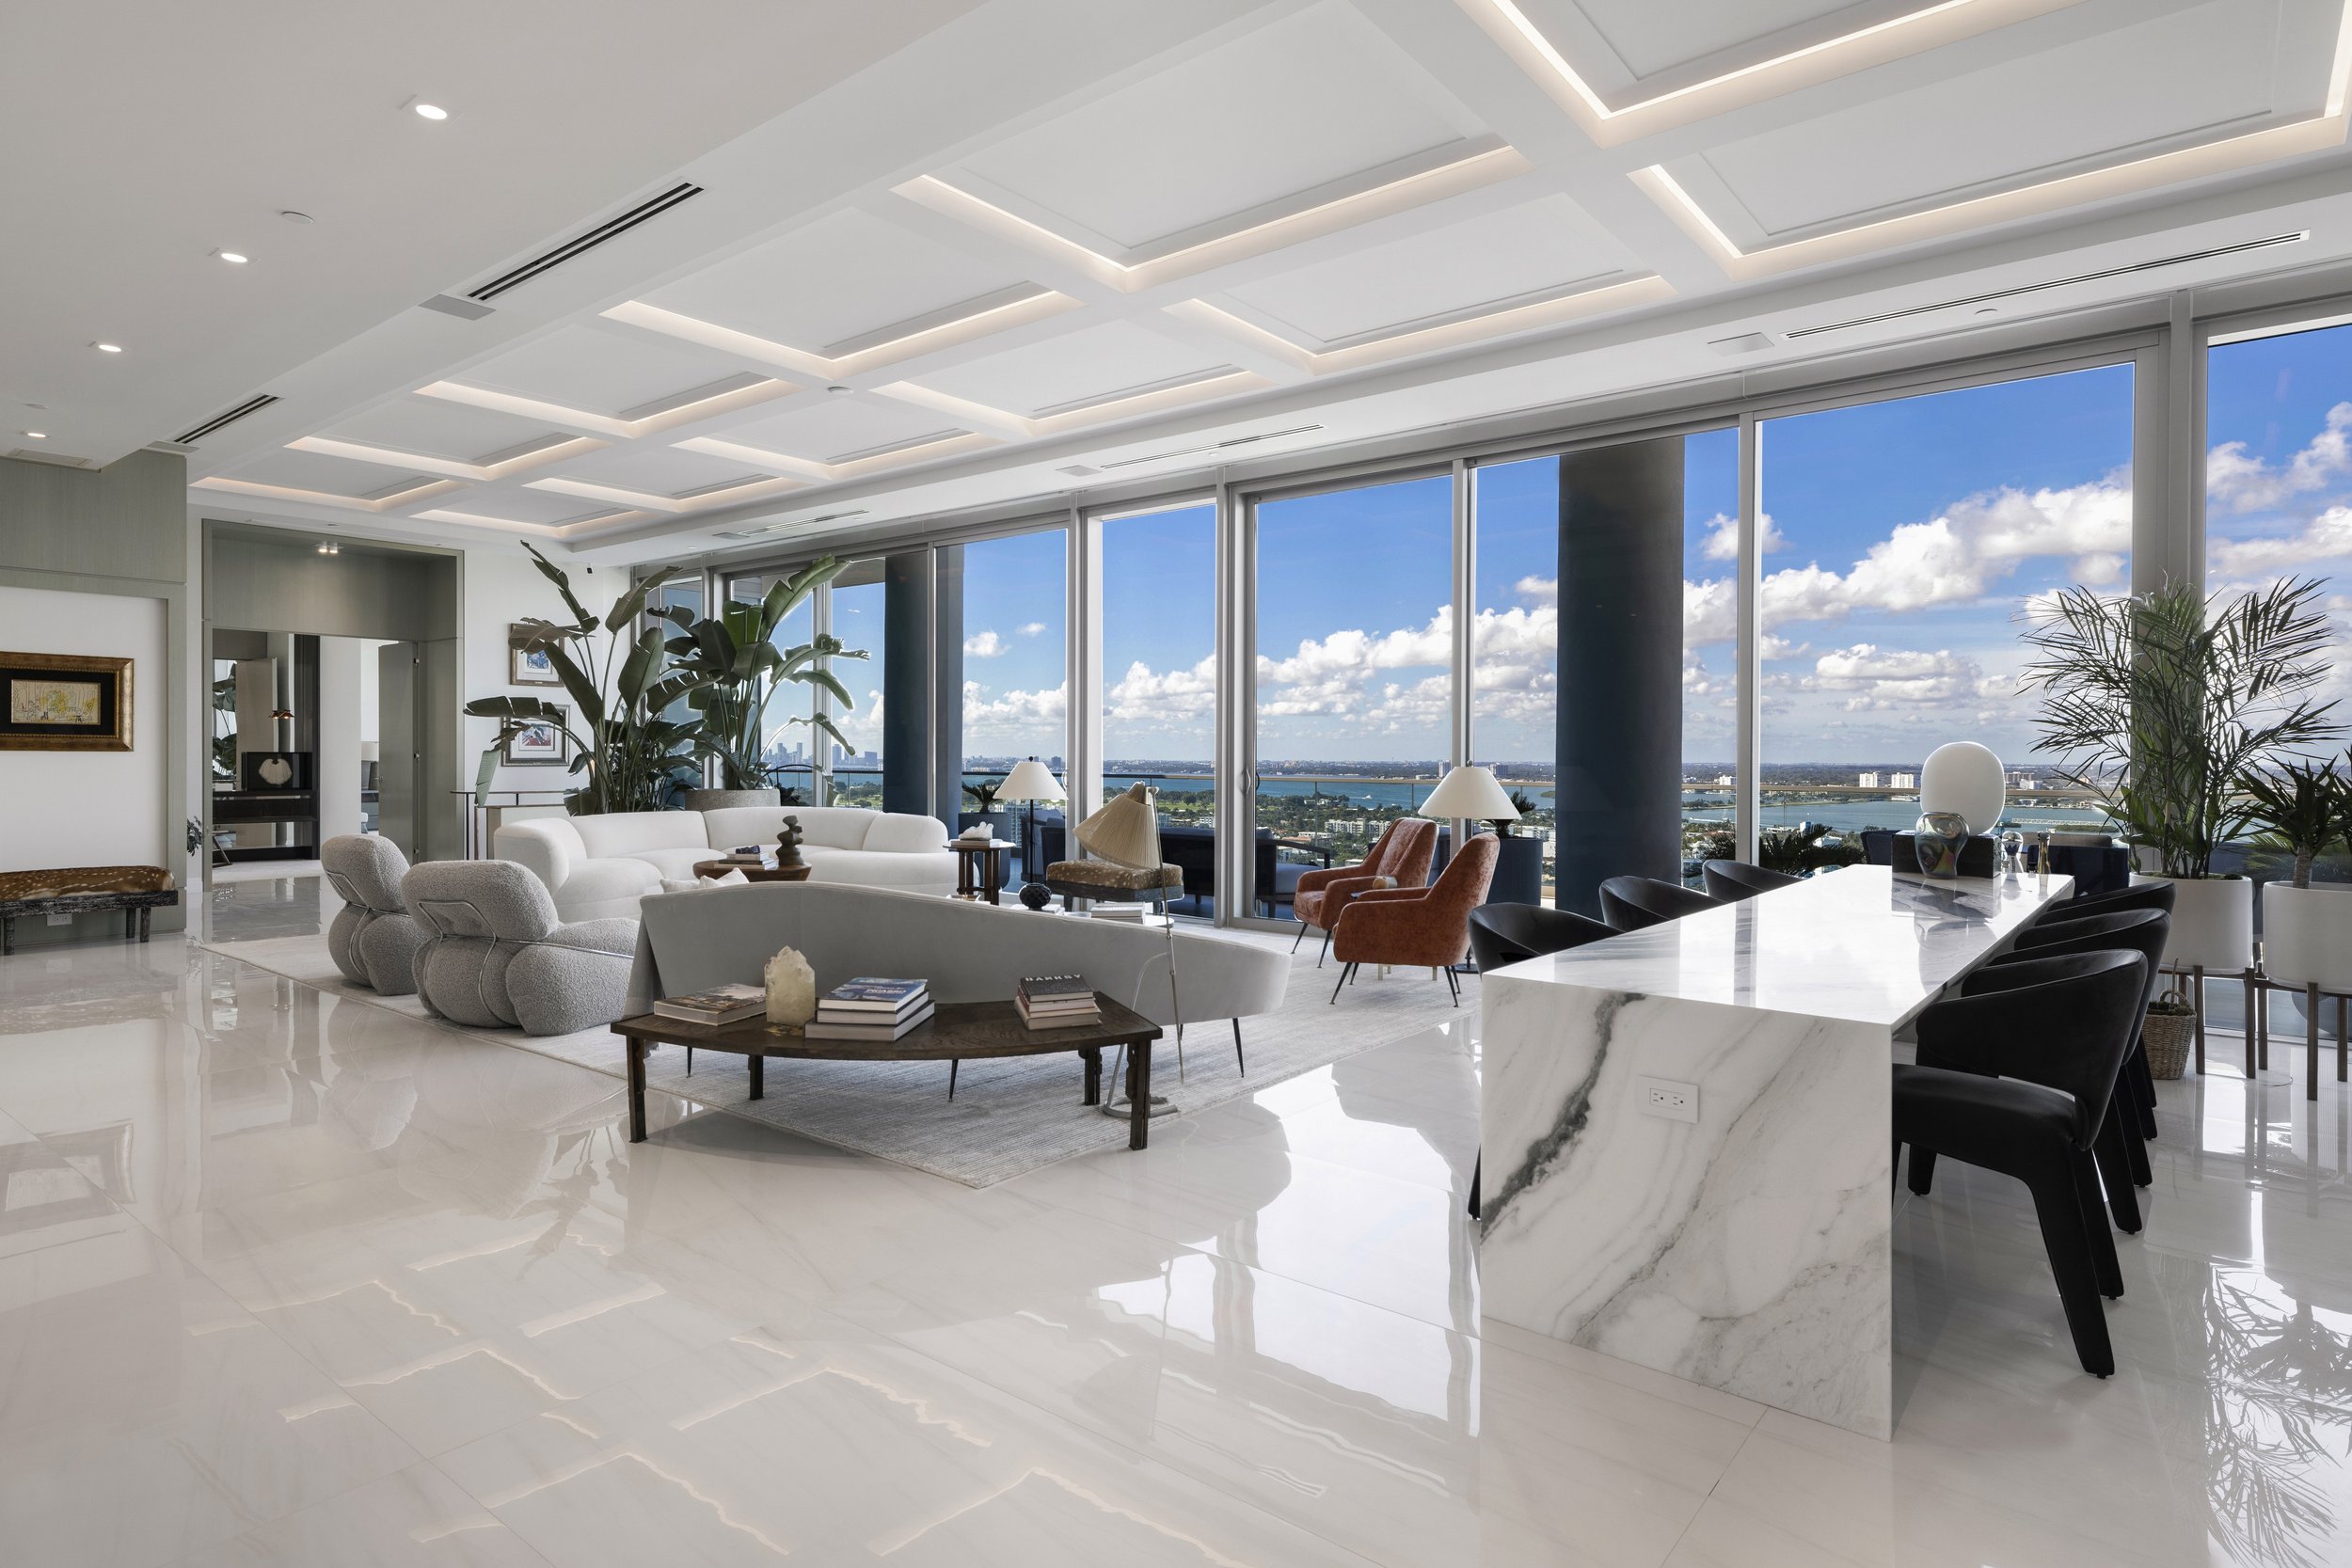 Step Inside This Two-Story Crown Jewel Penthouse At Oceana Bal Harbour Asking $25 Million 1.jpg